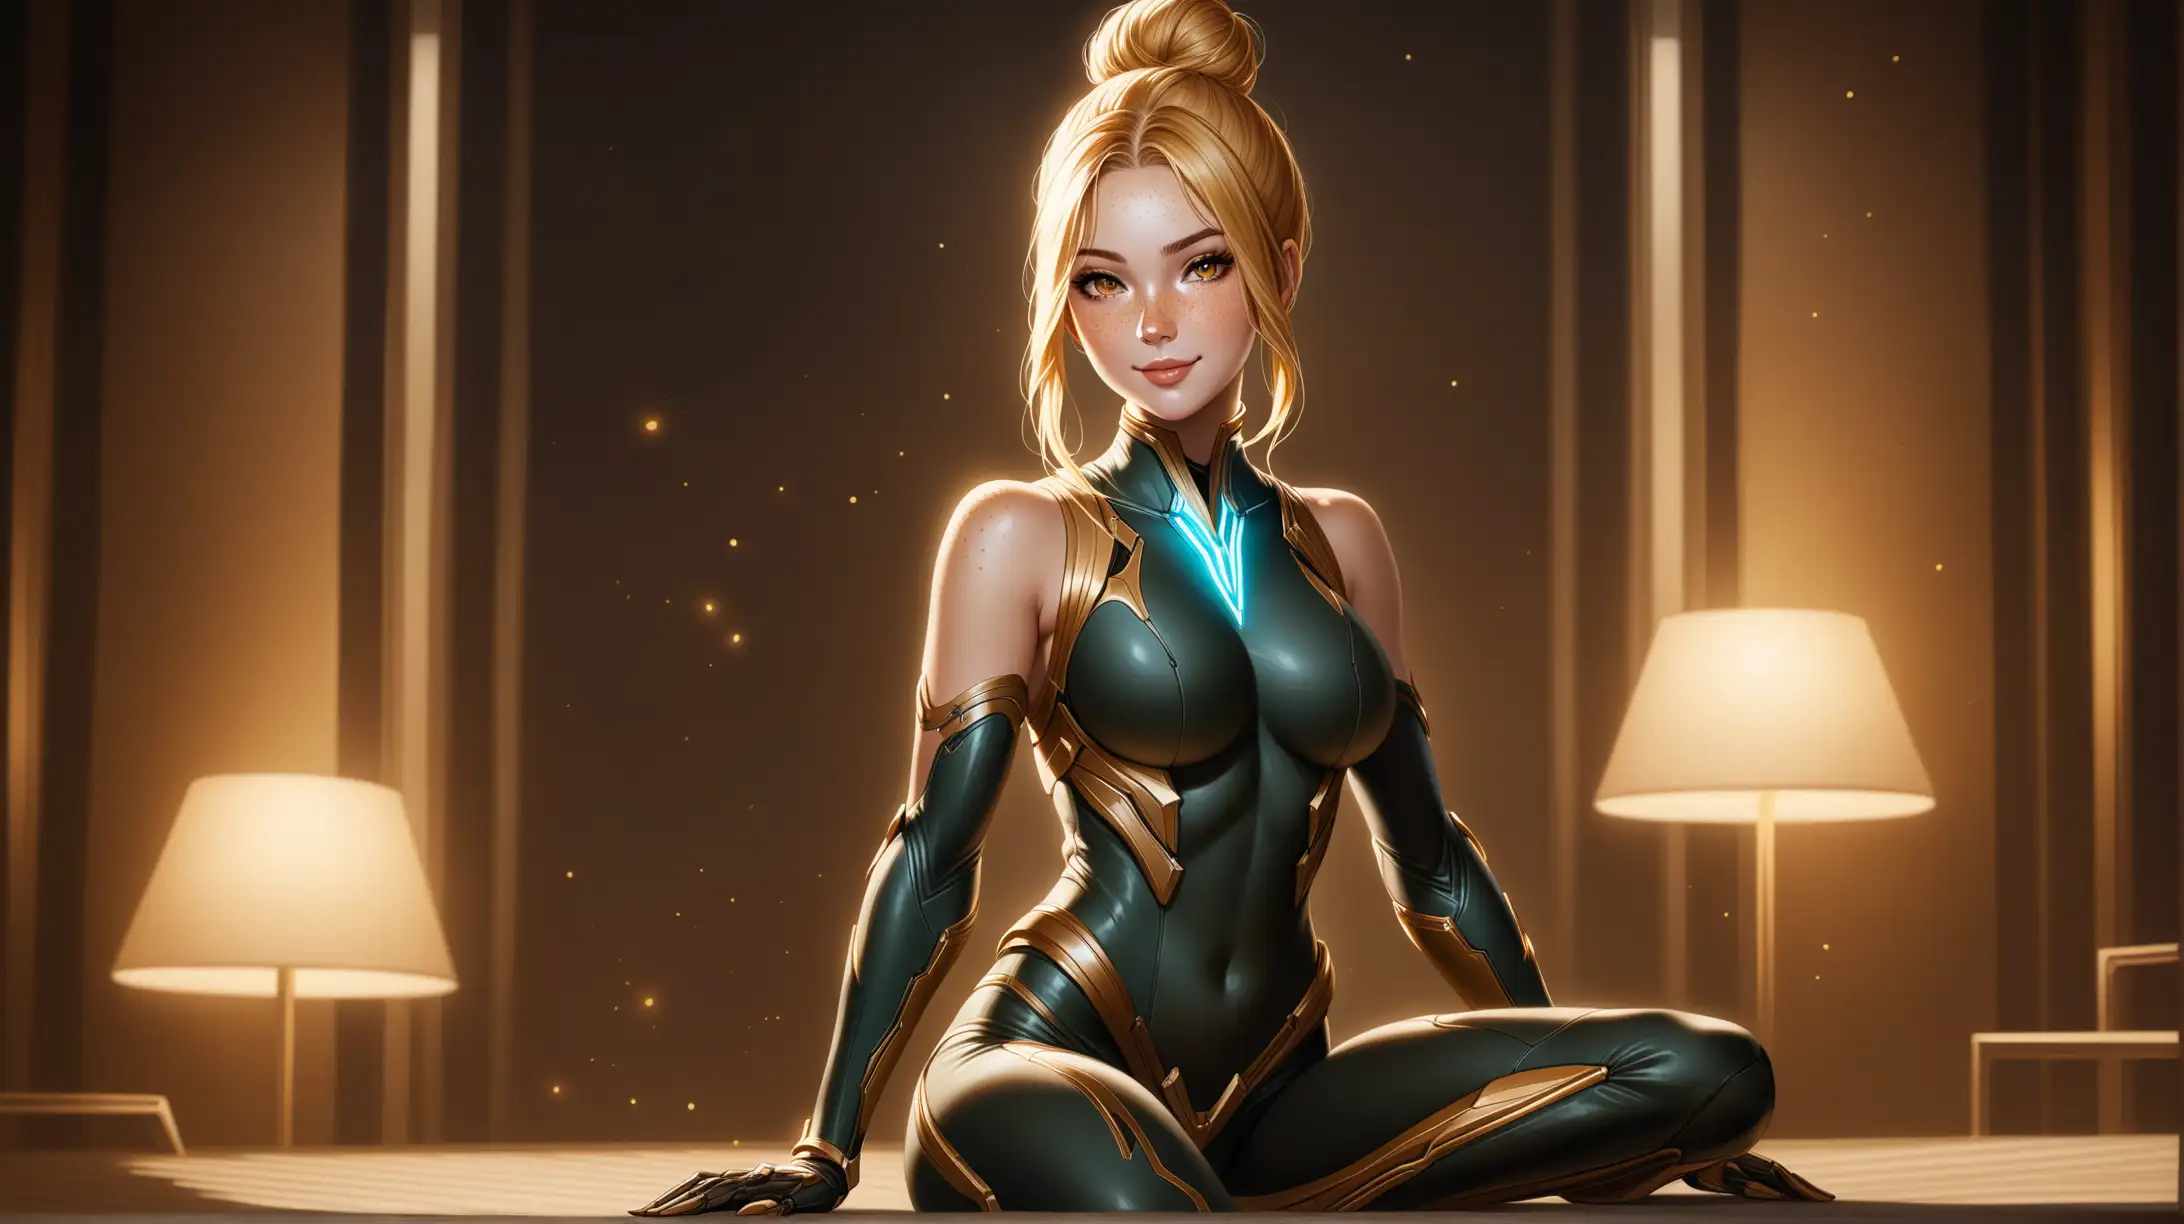 Seductive Woman with Gold Eyes in a WarframeInspired Outfit Sitting Indoors